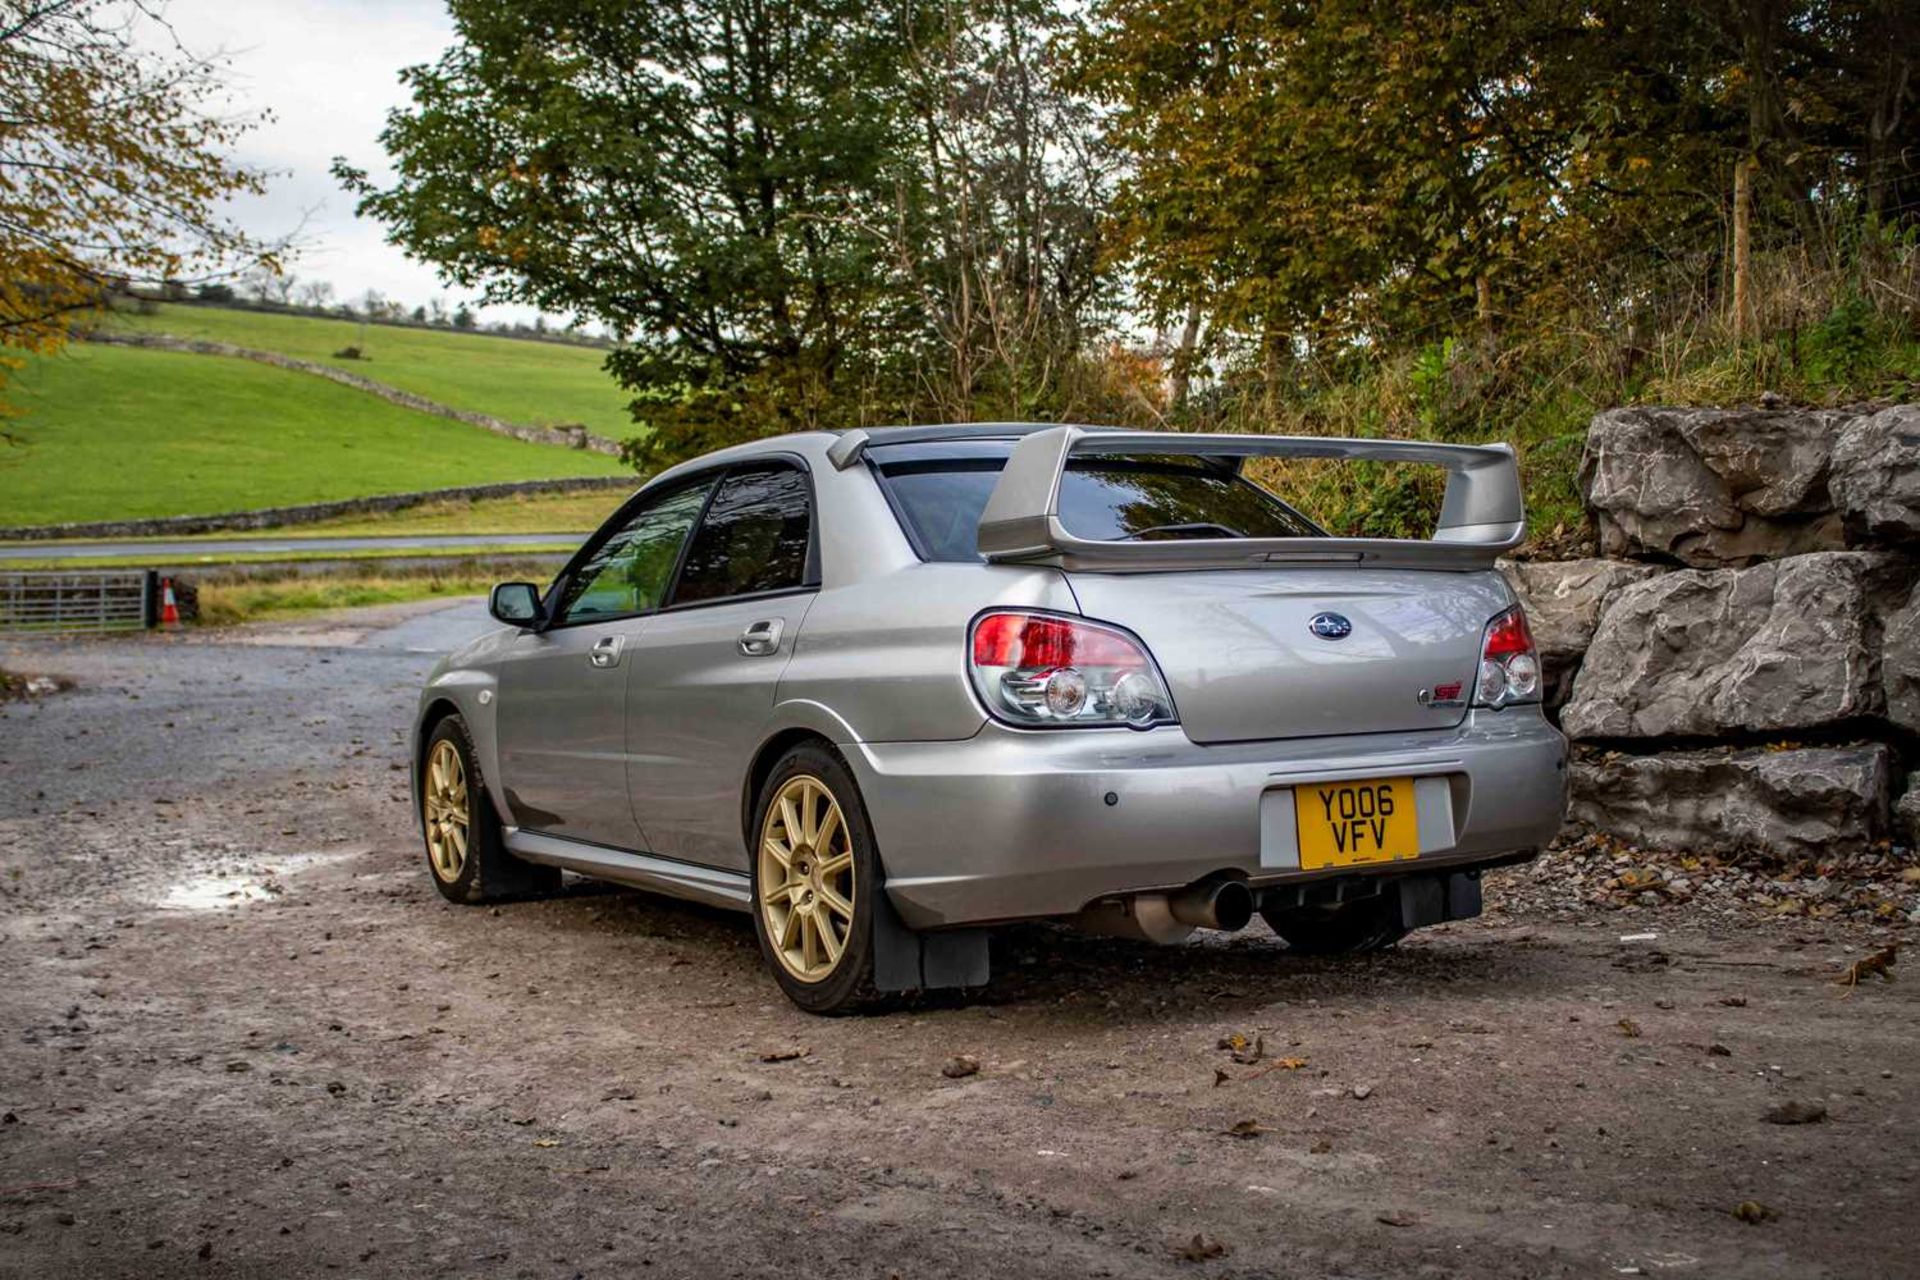 2006 Subaru Impreza WRX STi Featuring a plethora of desirable upgrades, supported by a dyno printout - Image 11 of 103